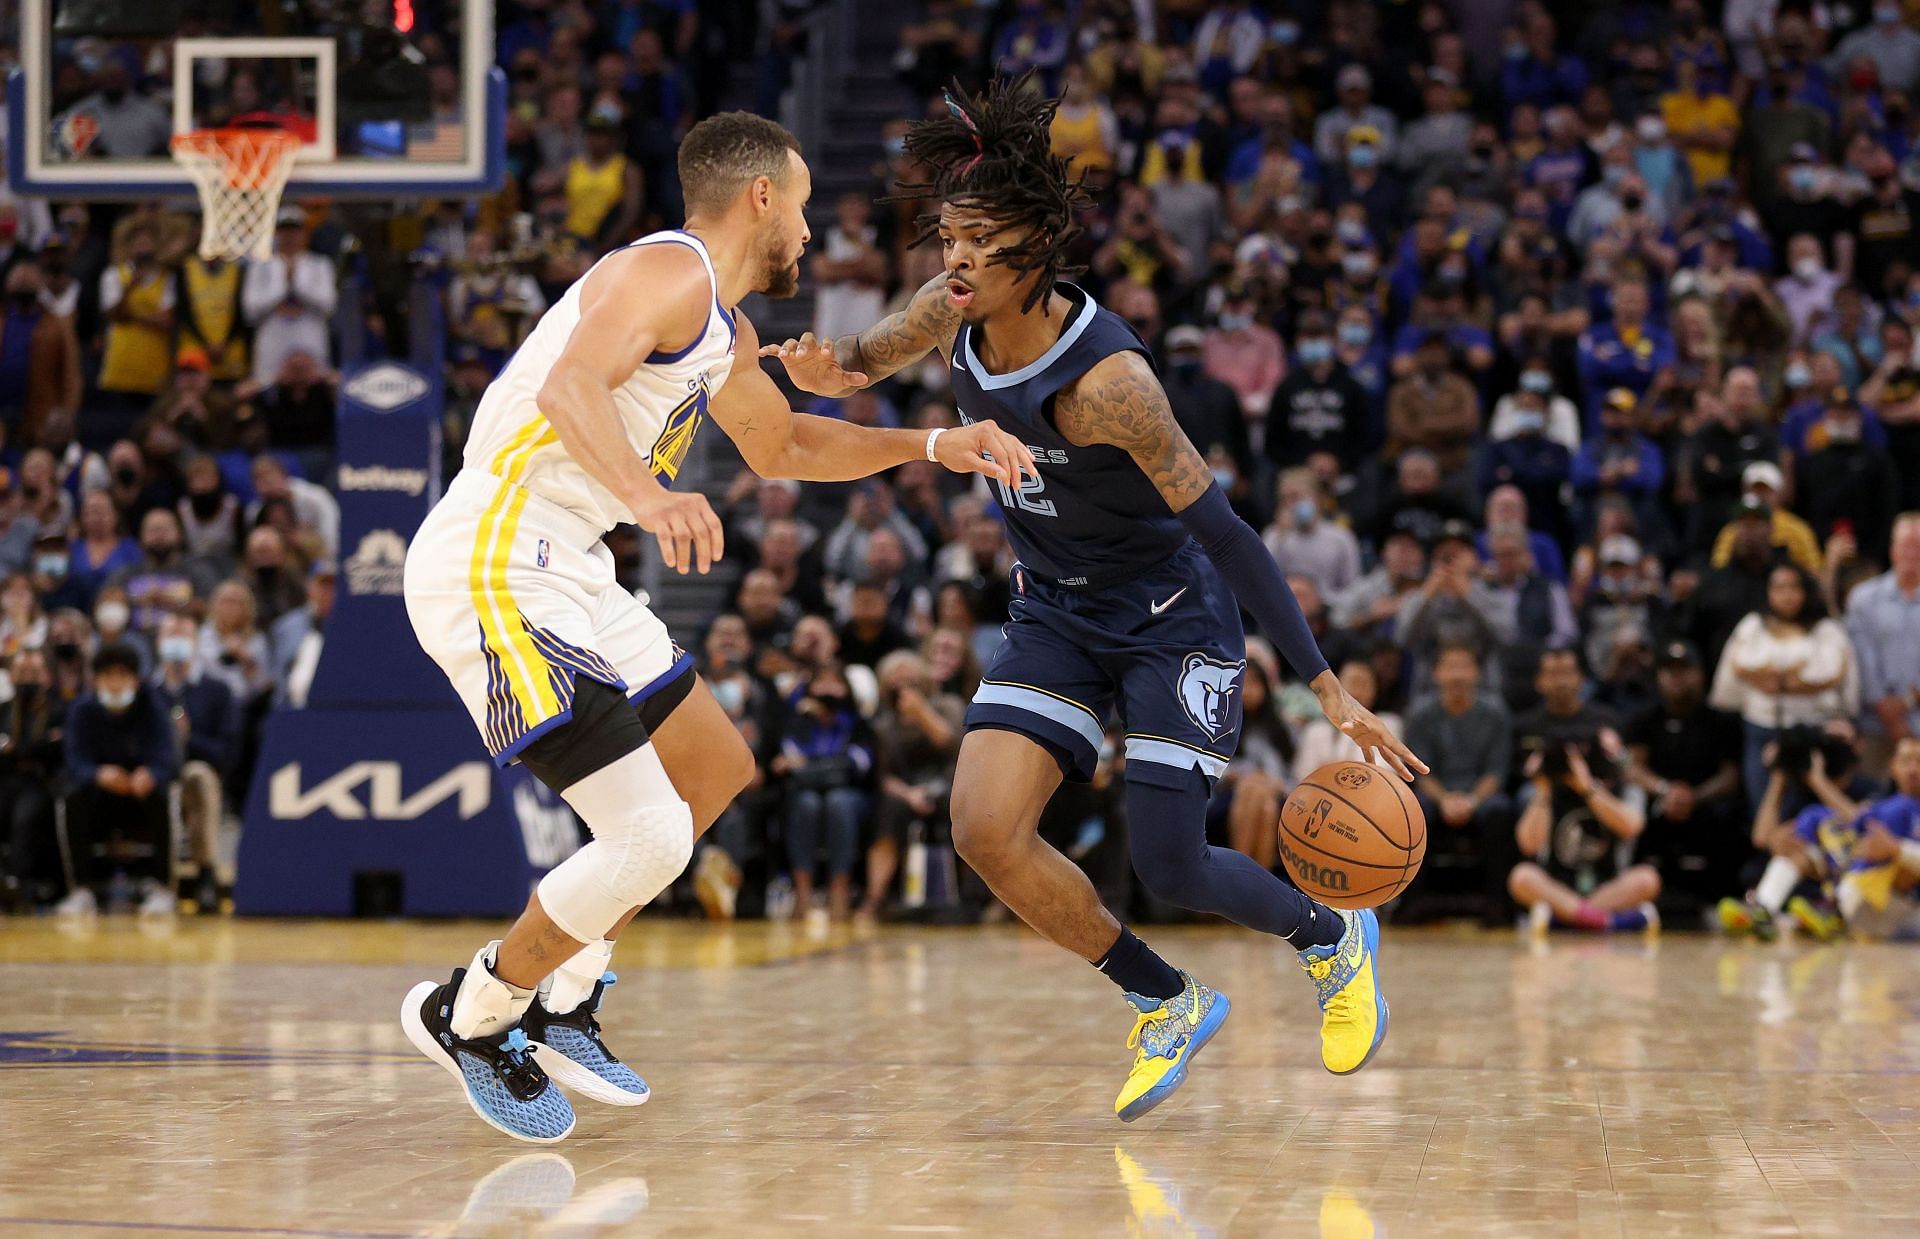 Ja Morant No. 12 of the Memphis Grizzlies is guarded by Steph Curry No. 30 of the Golden State Warriors.